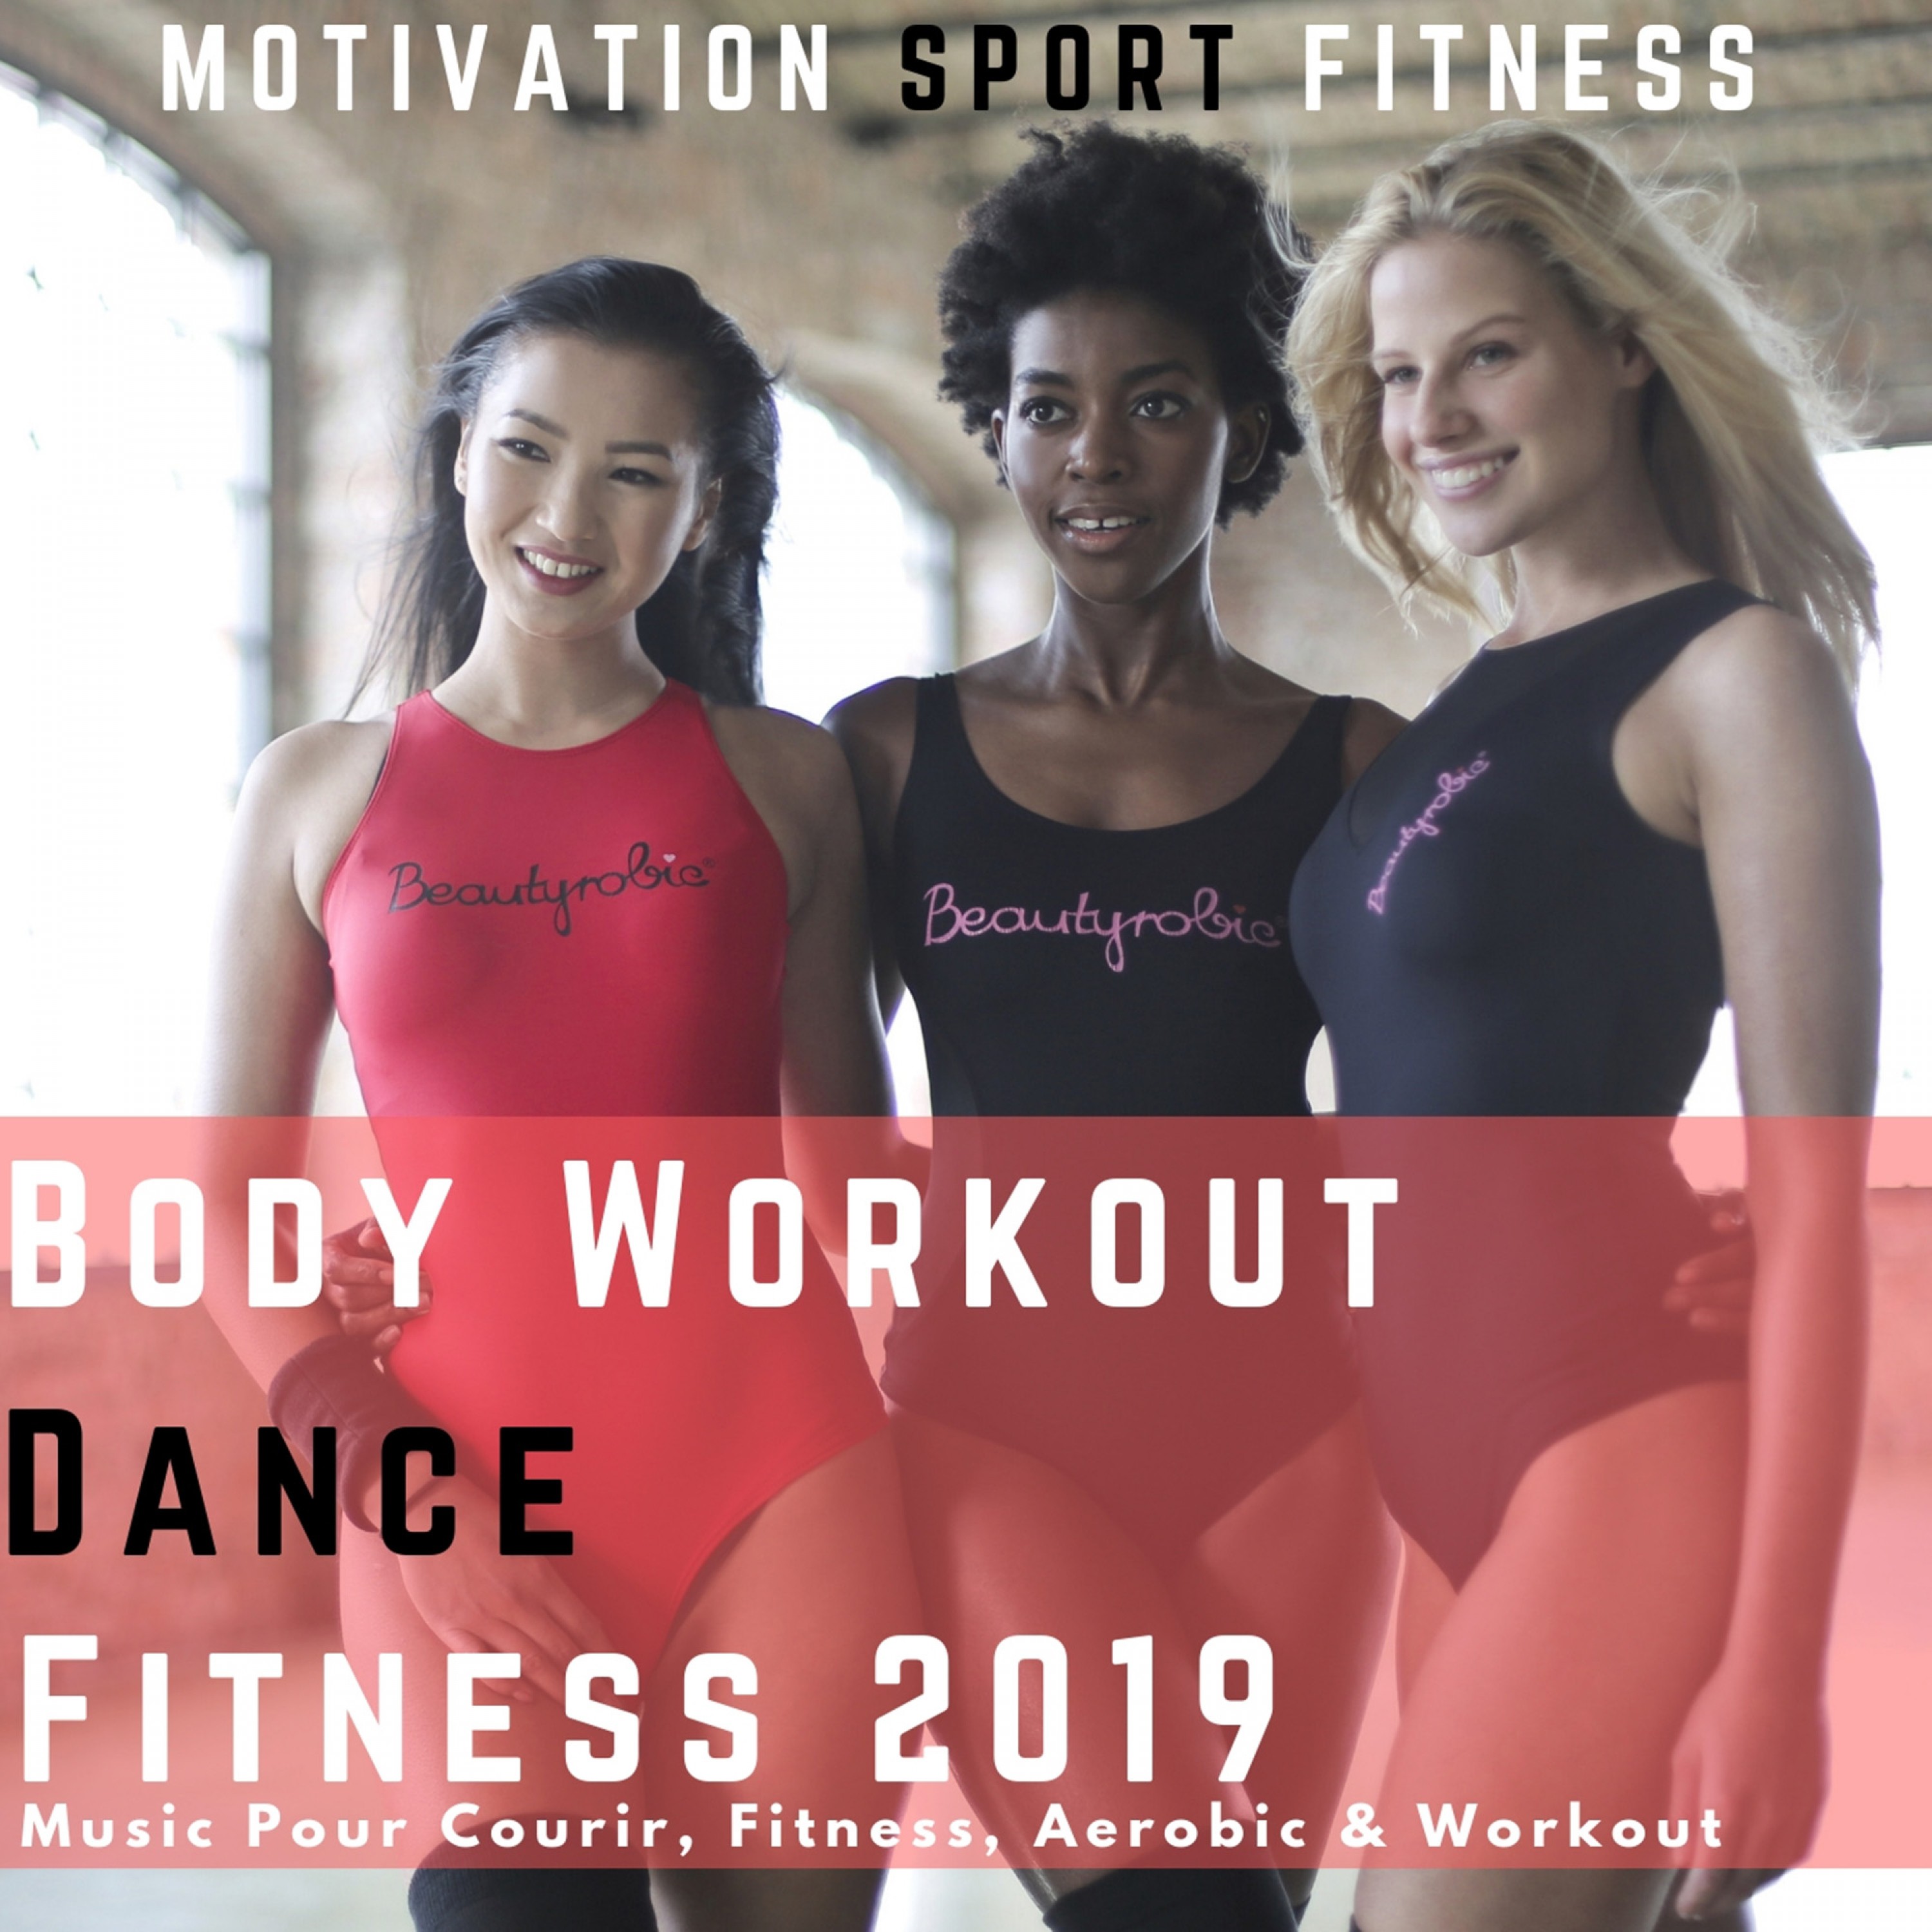 Body Workout Dance Fitness 2019